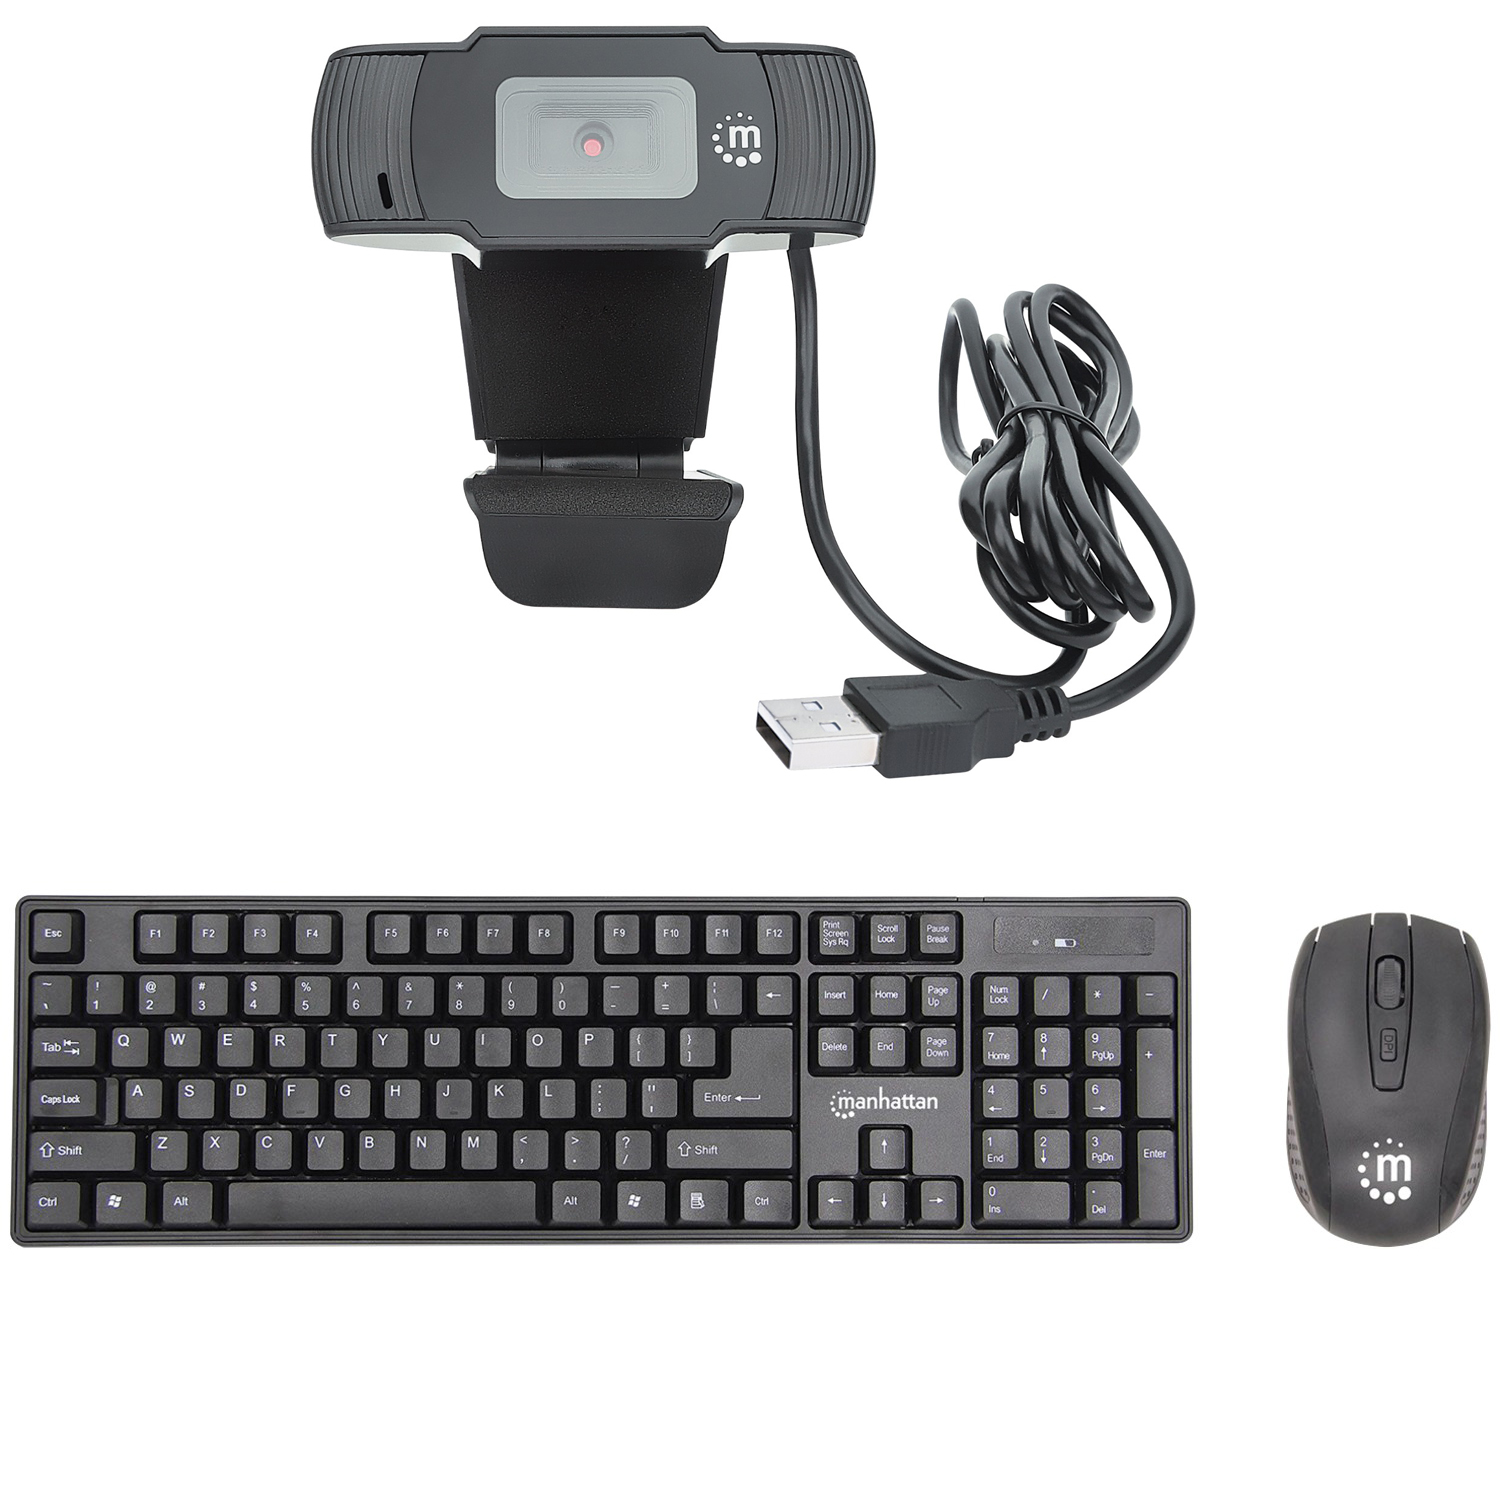 Manhattan 462006 1080p USB Webcam with Built-in Microphone & 178990 Wireless Keyboard & Optical Mouse Set - image 1 of 3